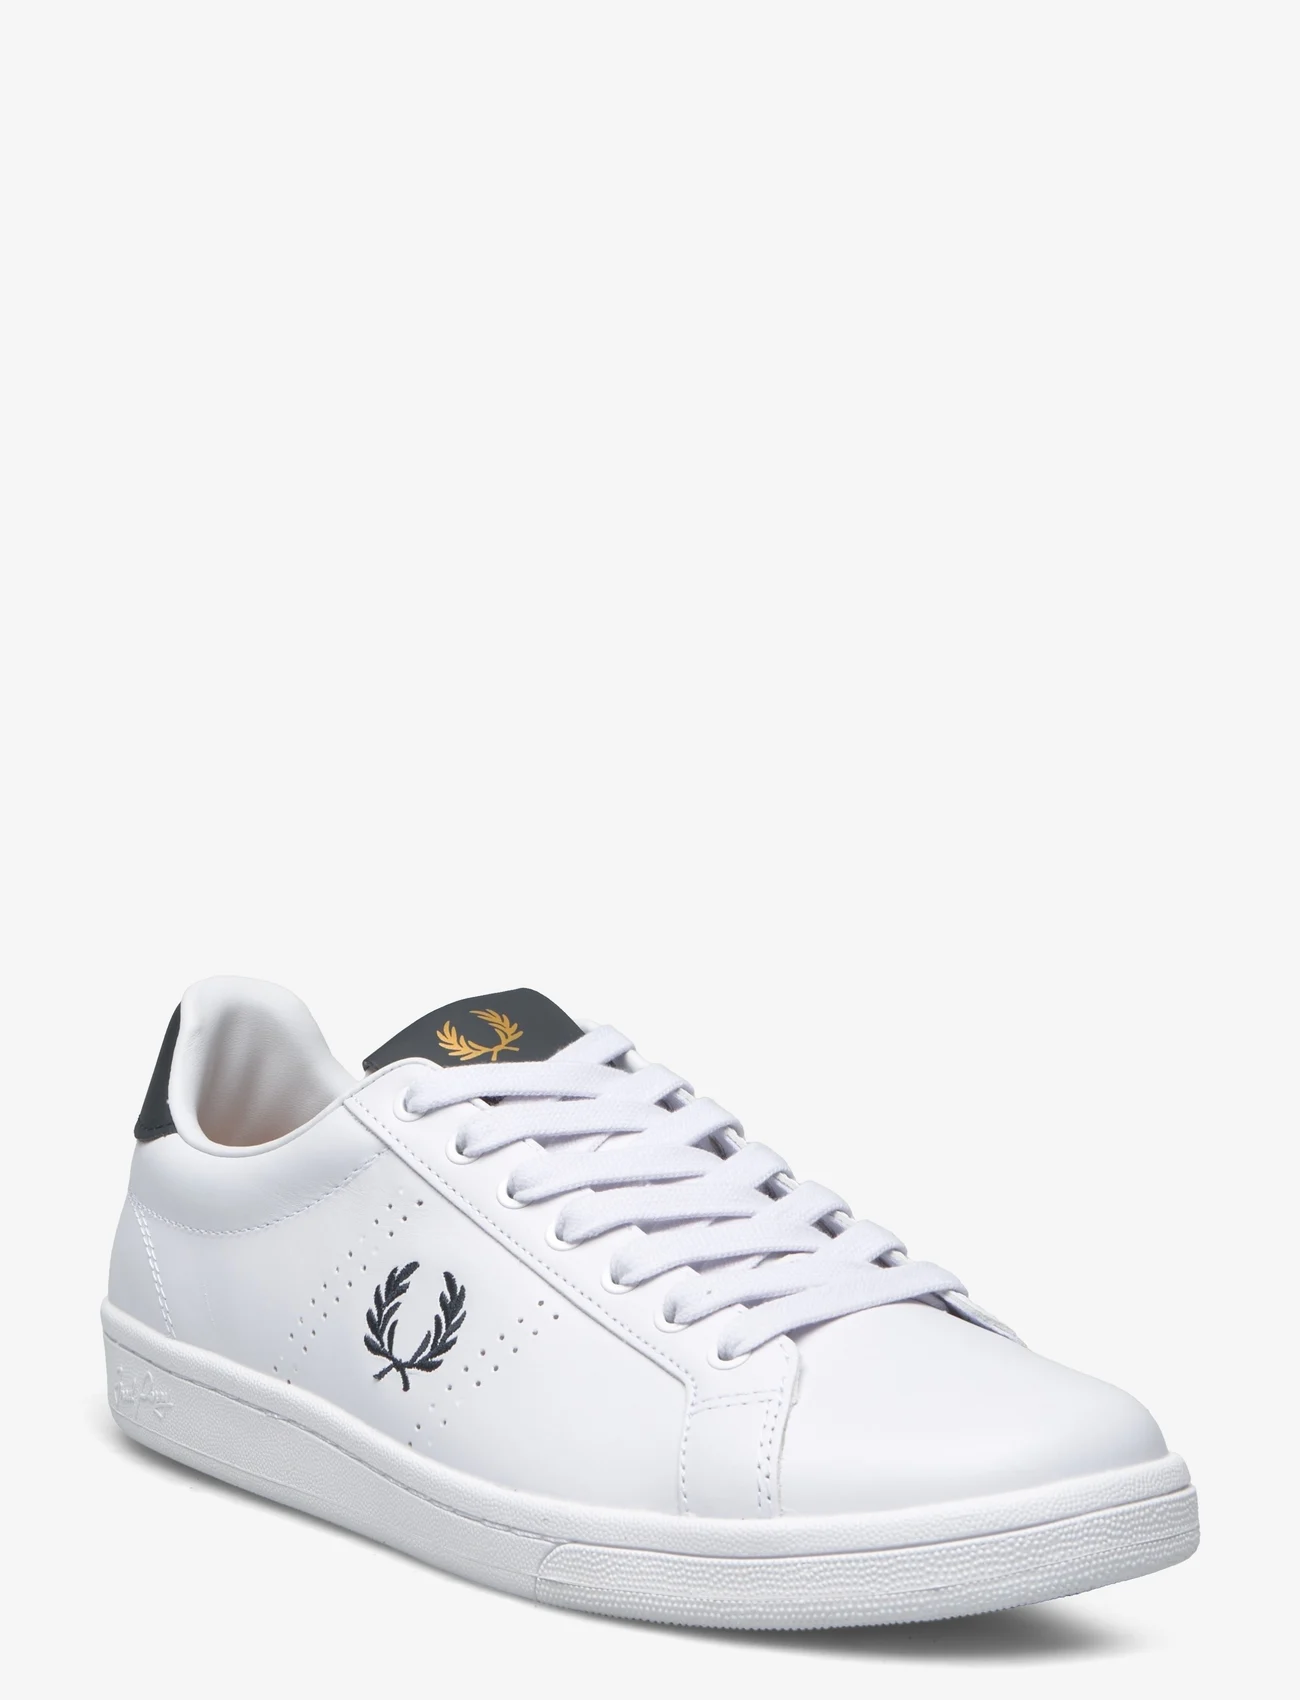 Fred Perry - B721 LEATHER - lave sneakers - white - 0